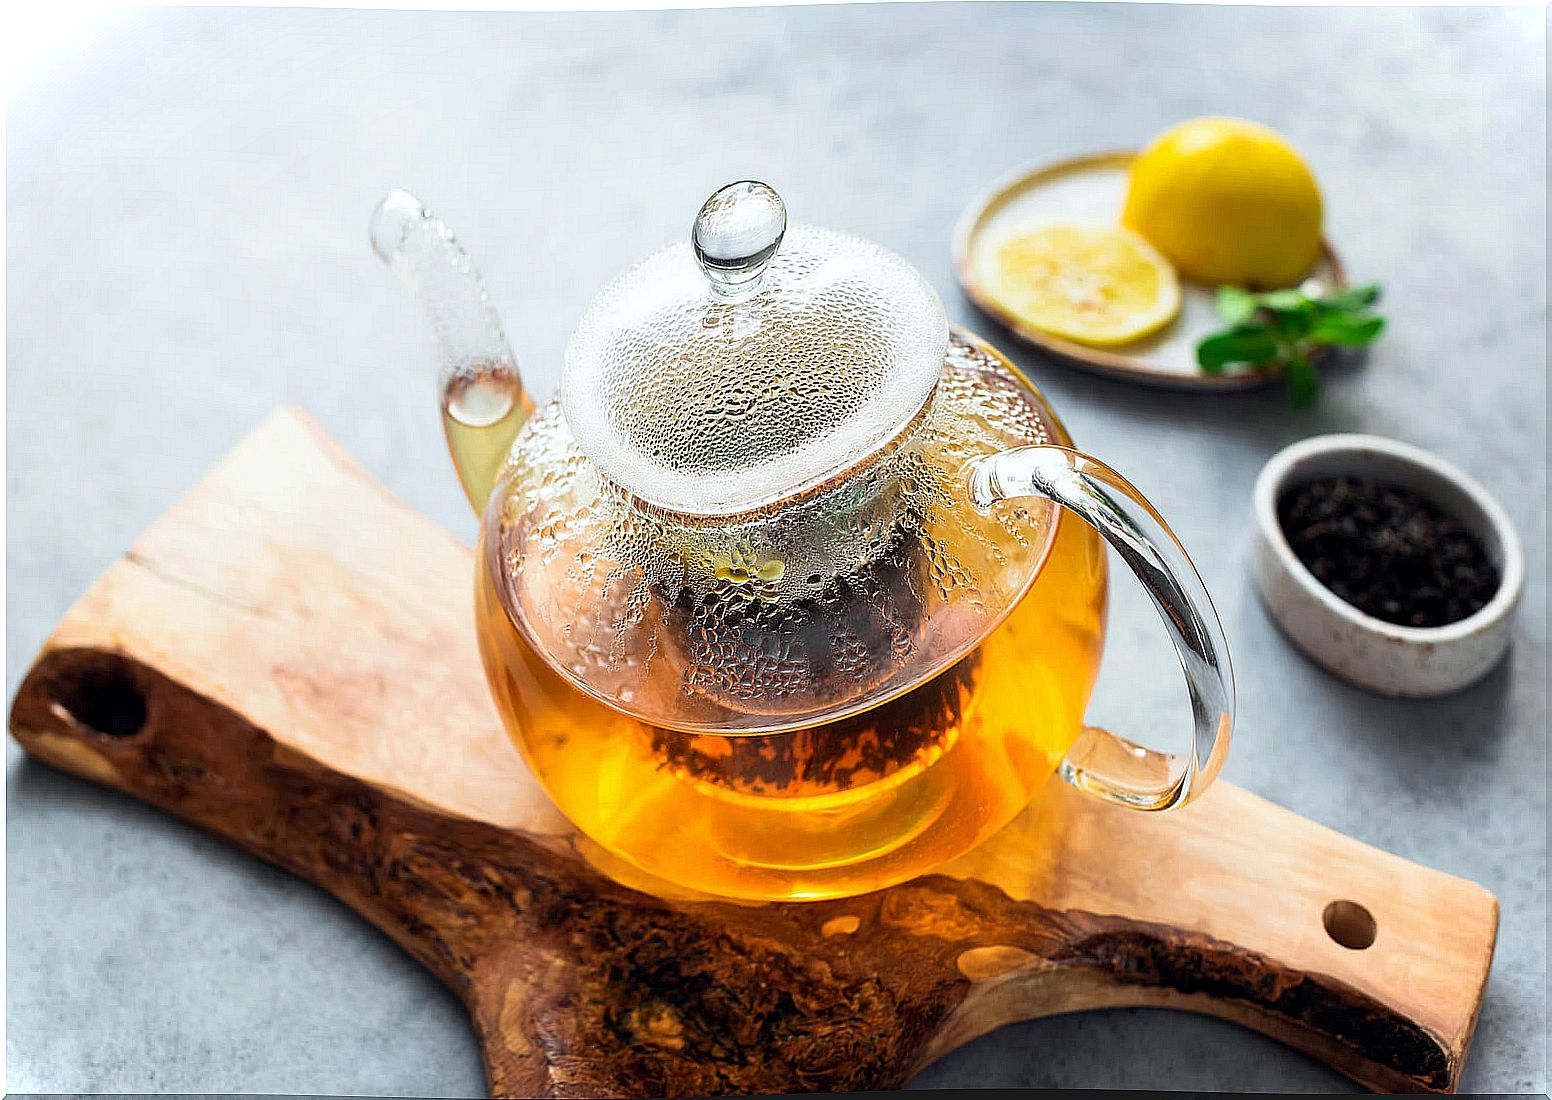 Pitcher of green tea with lemon and cloves.